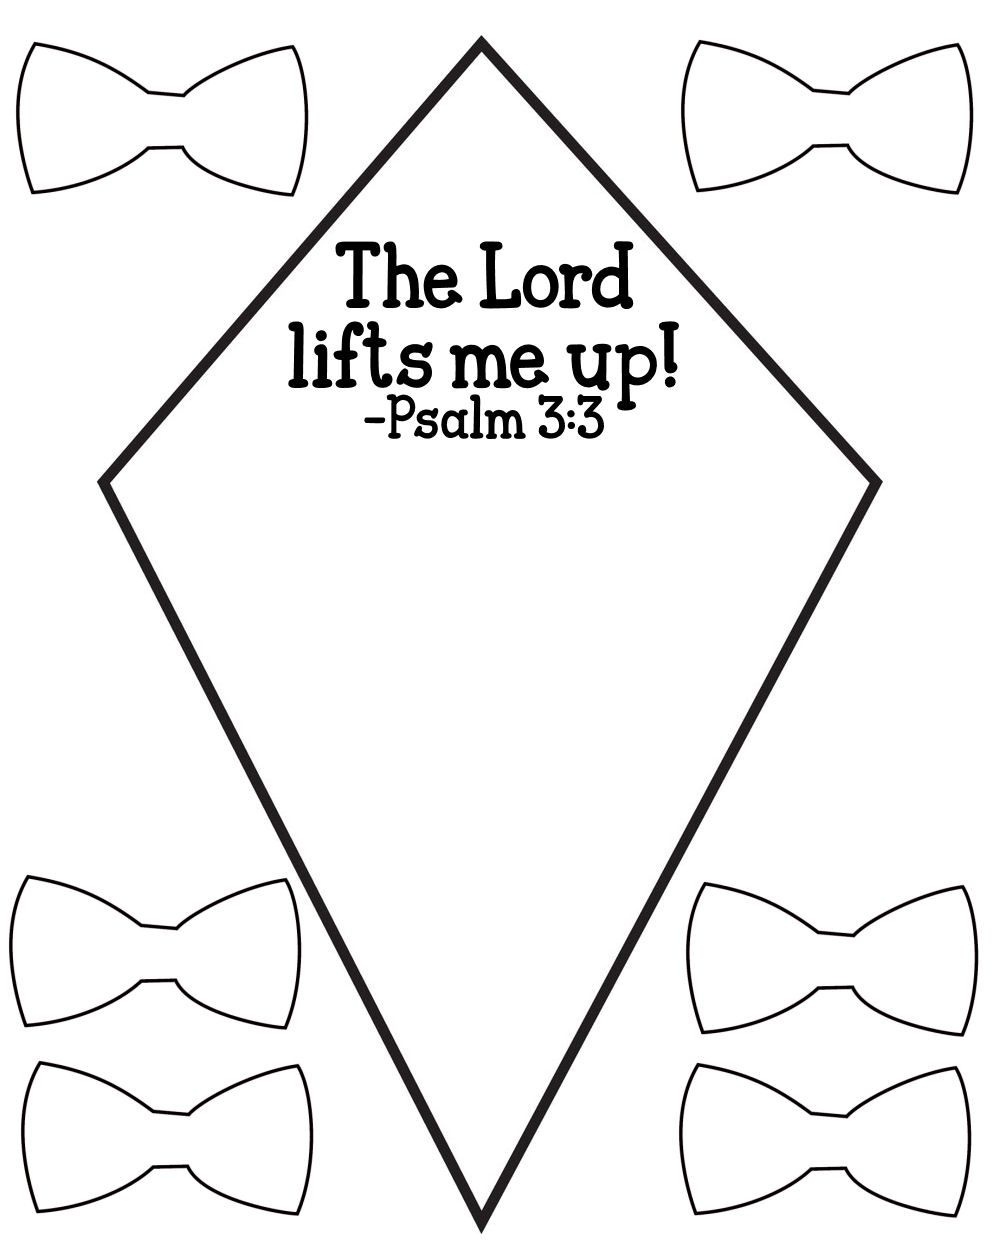 Free Psalm 3:3 Kids Bible Lesson Activity Printables - Free Printable Sunday School Crafts